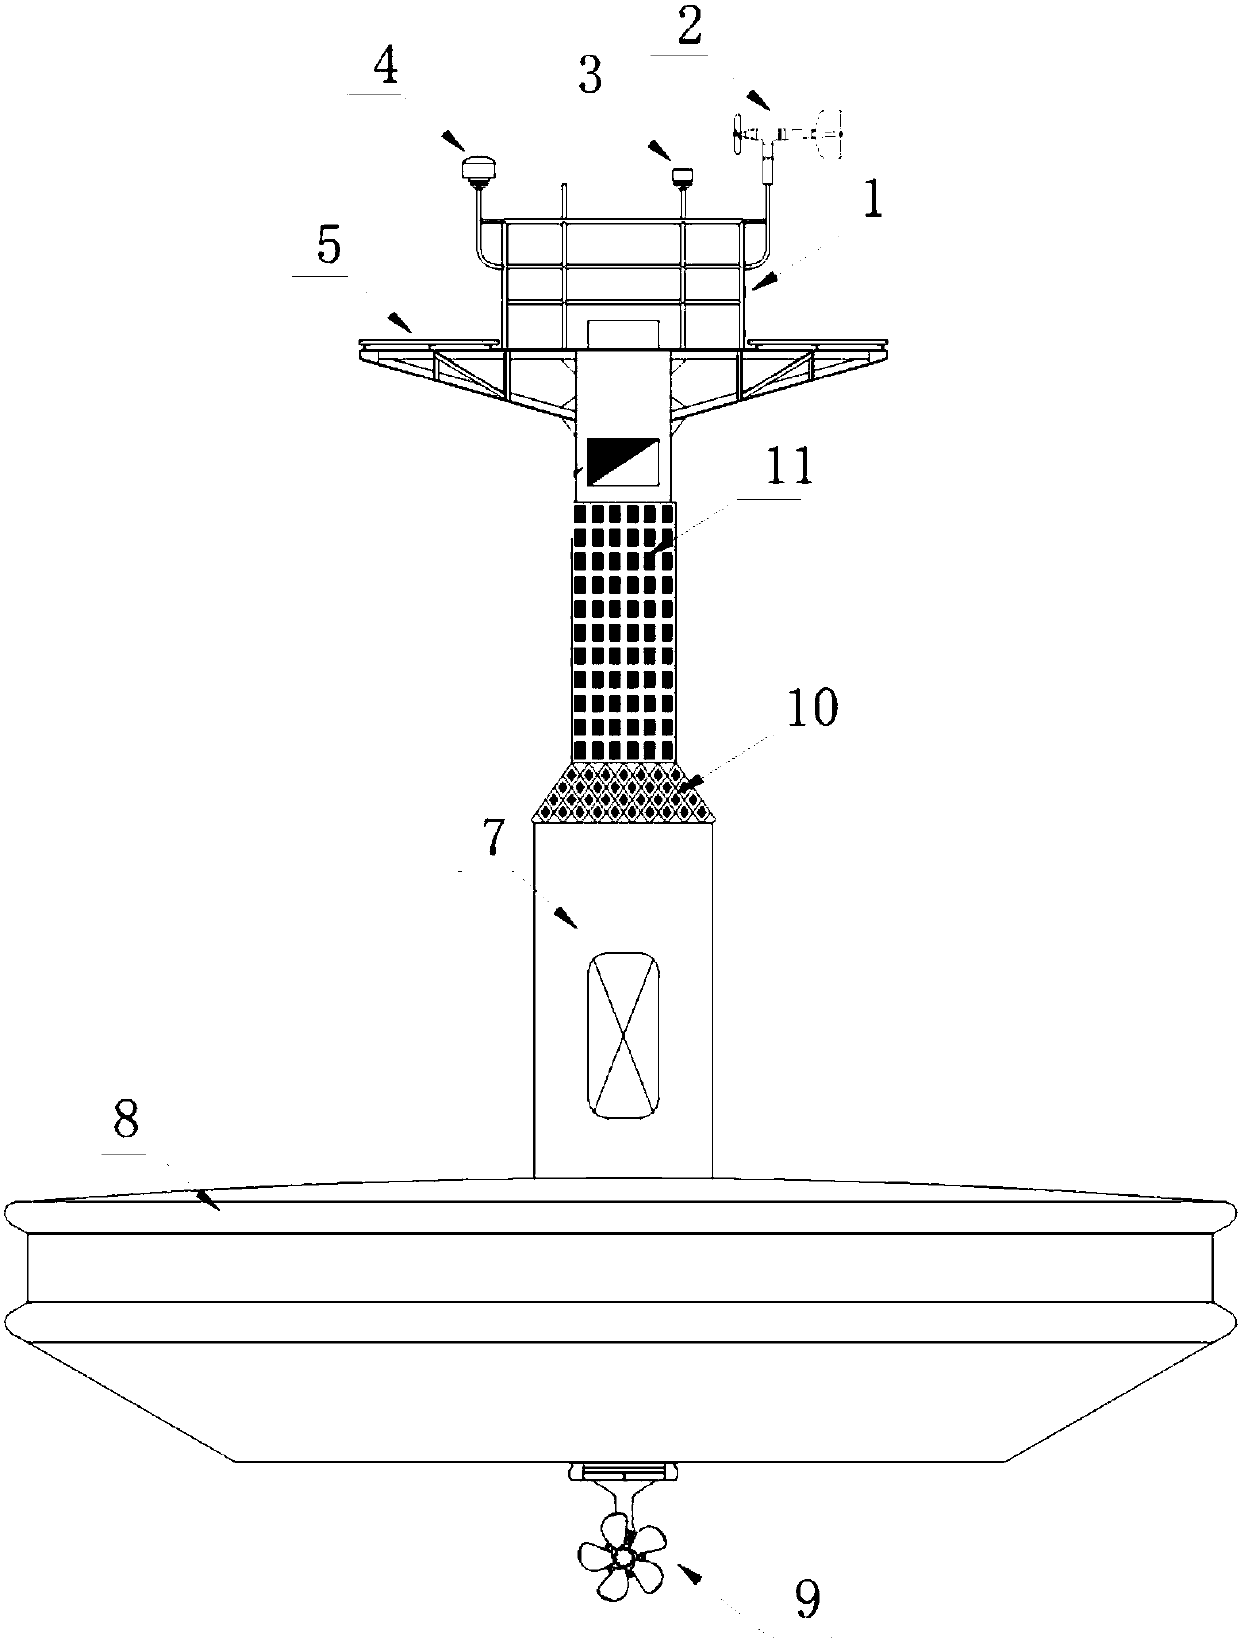 Mooring-free automatic restoring deep and high sea fixed-point observation buoy and method